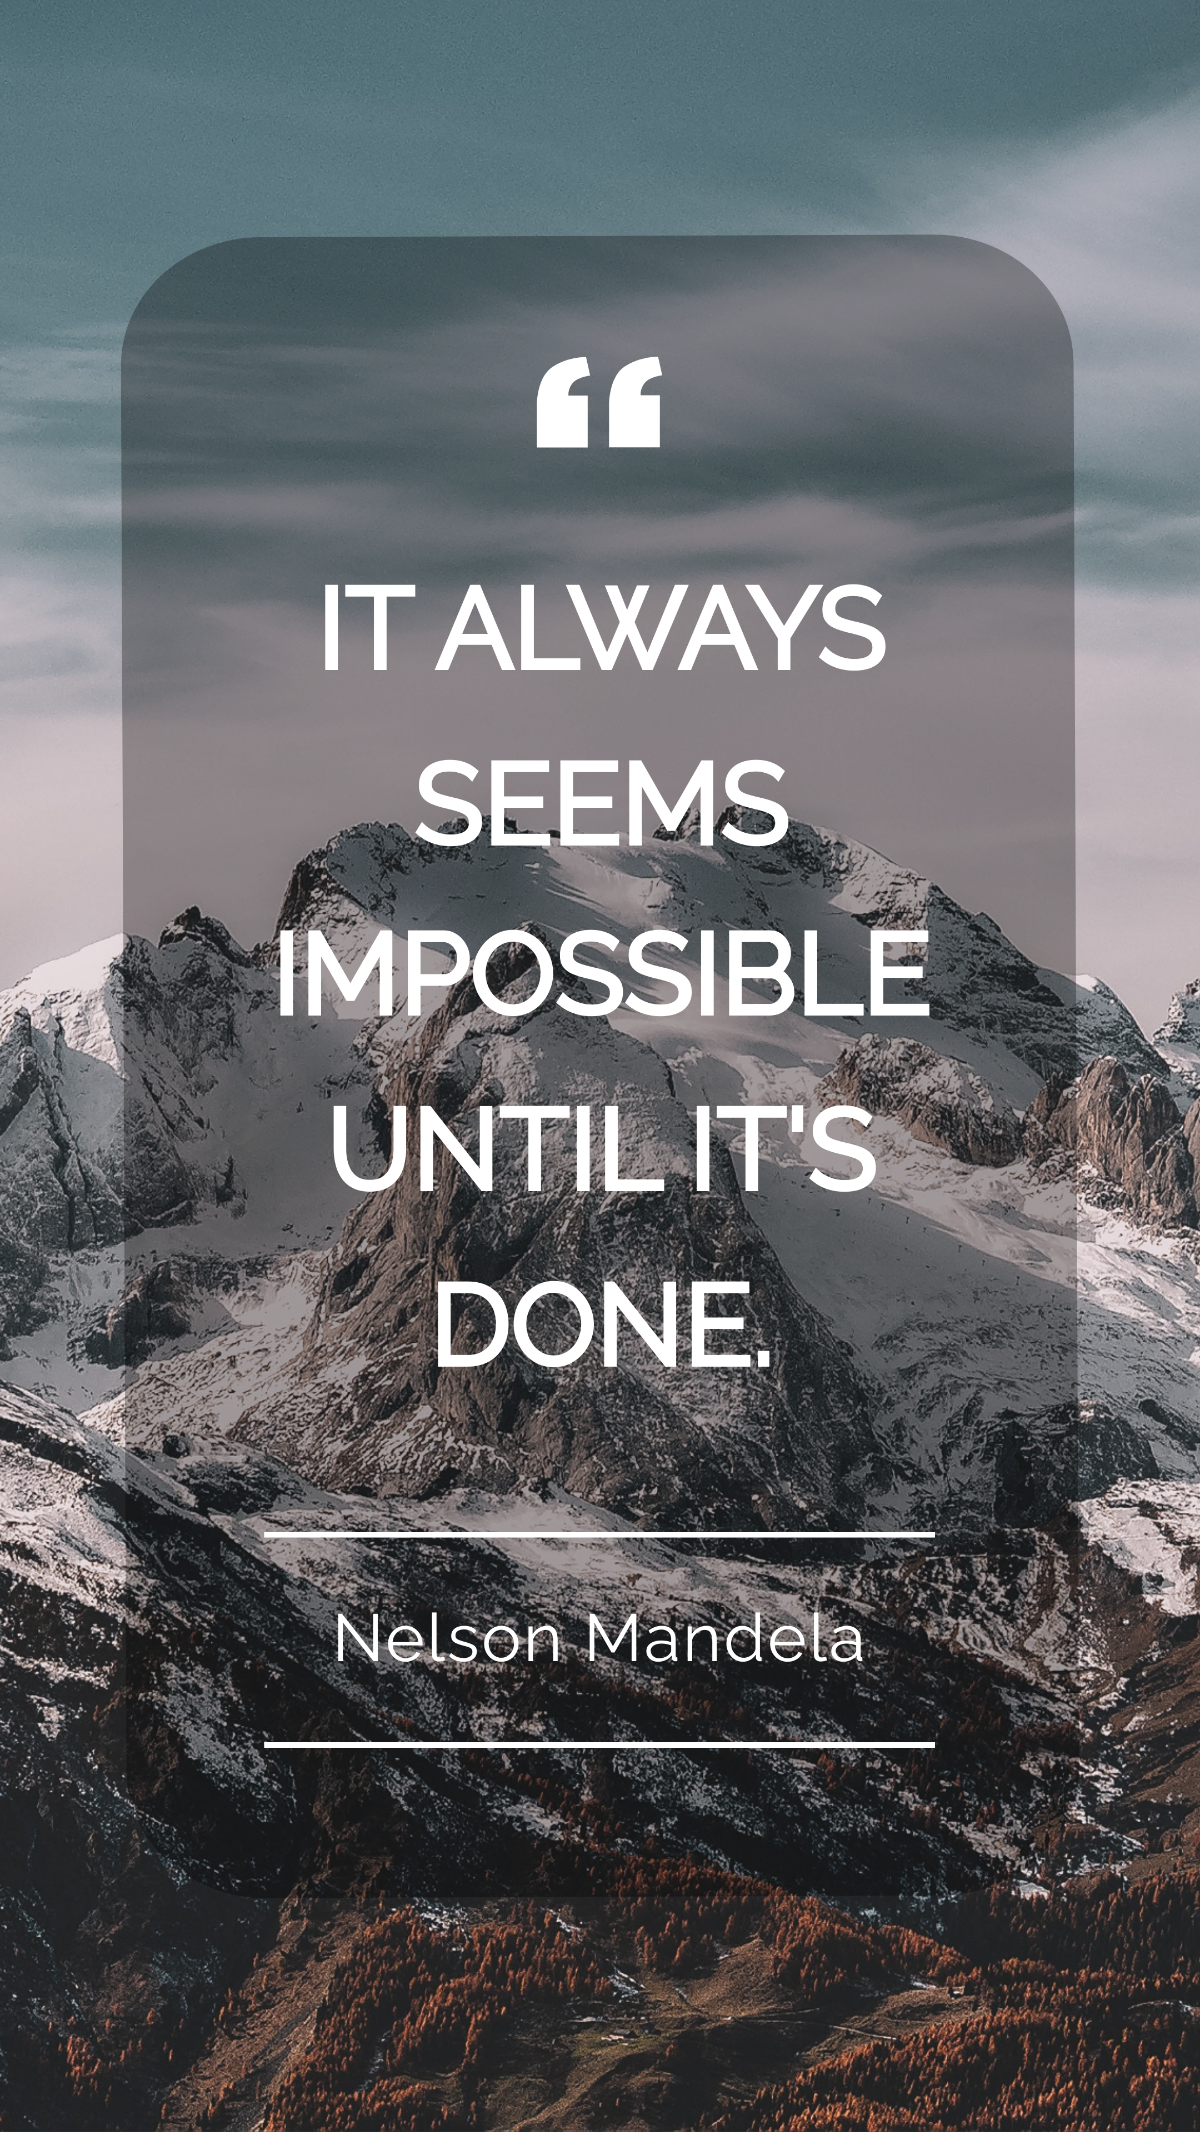 Nelson Mandela - “It always seems impossible until it’s done.” Template